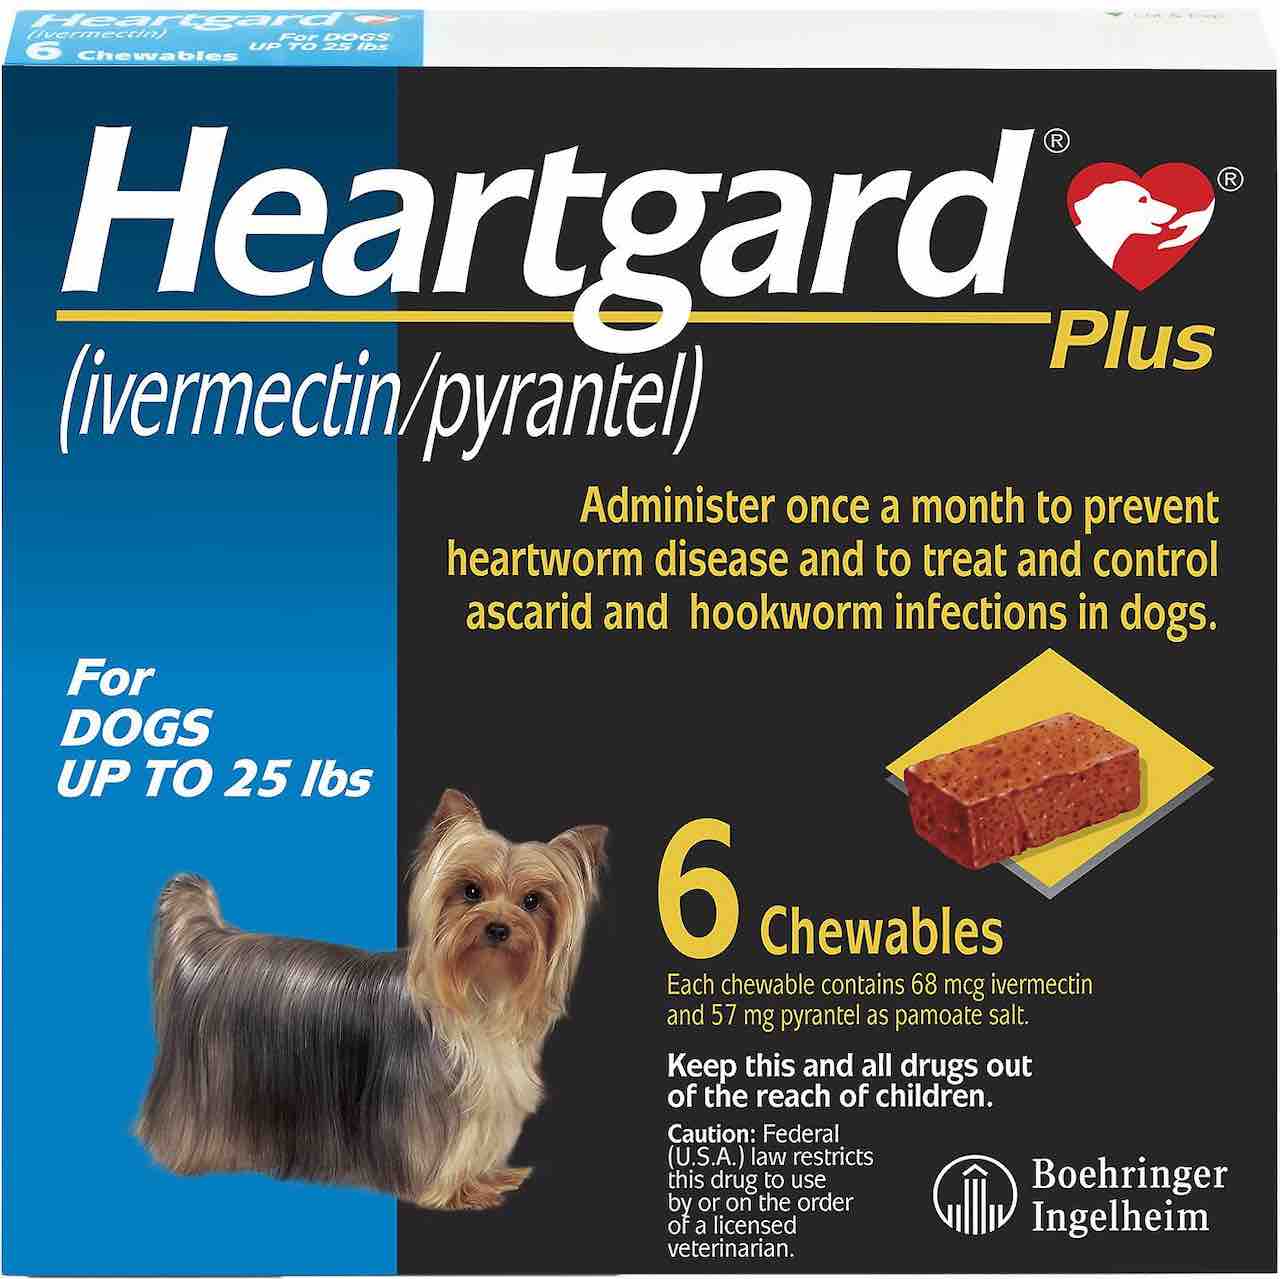 Heartgard Plus Chewables 6 doses for dogs up to 25 lbs (Blue) 1